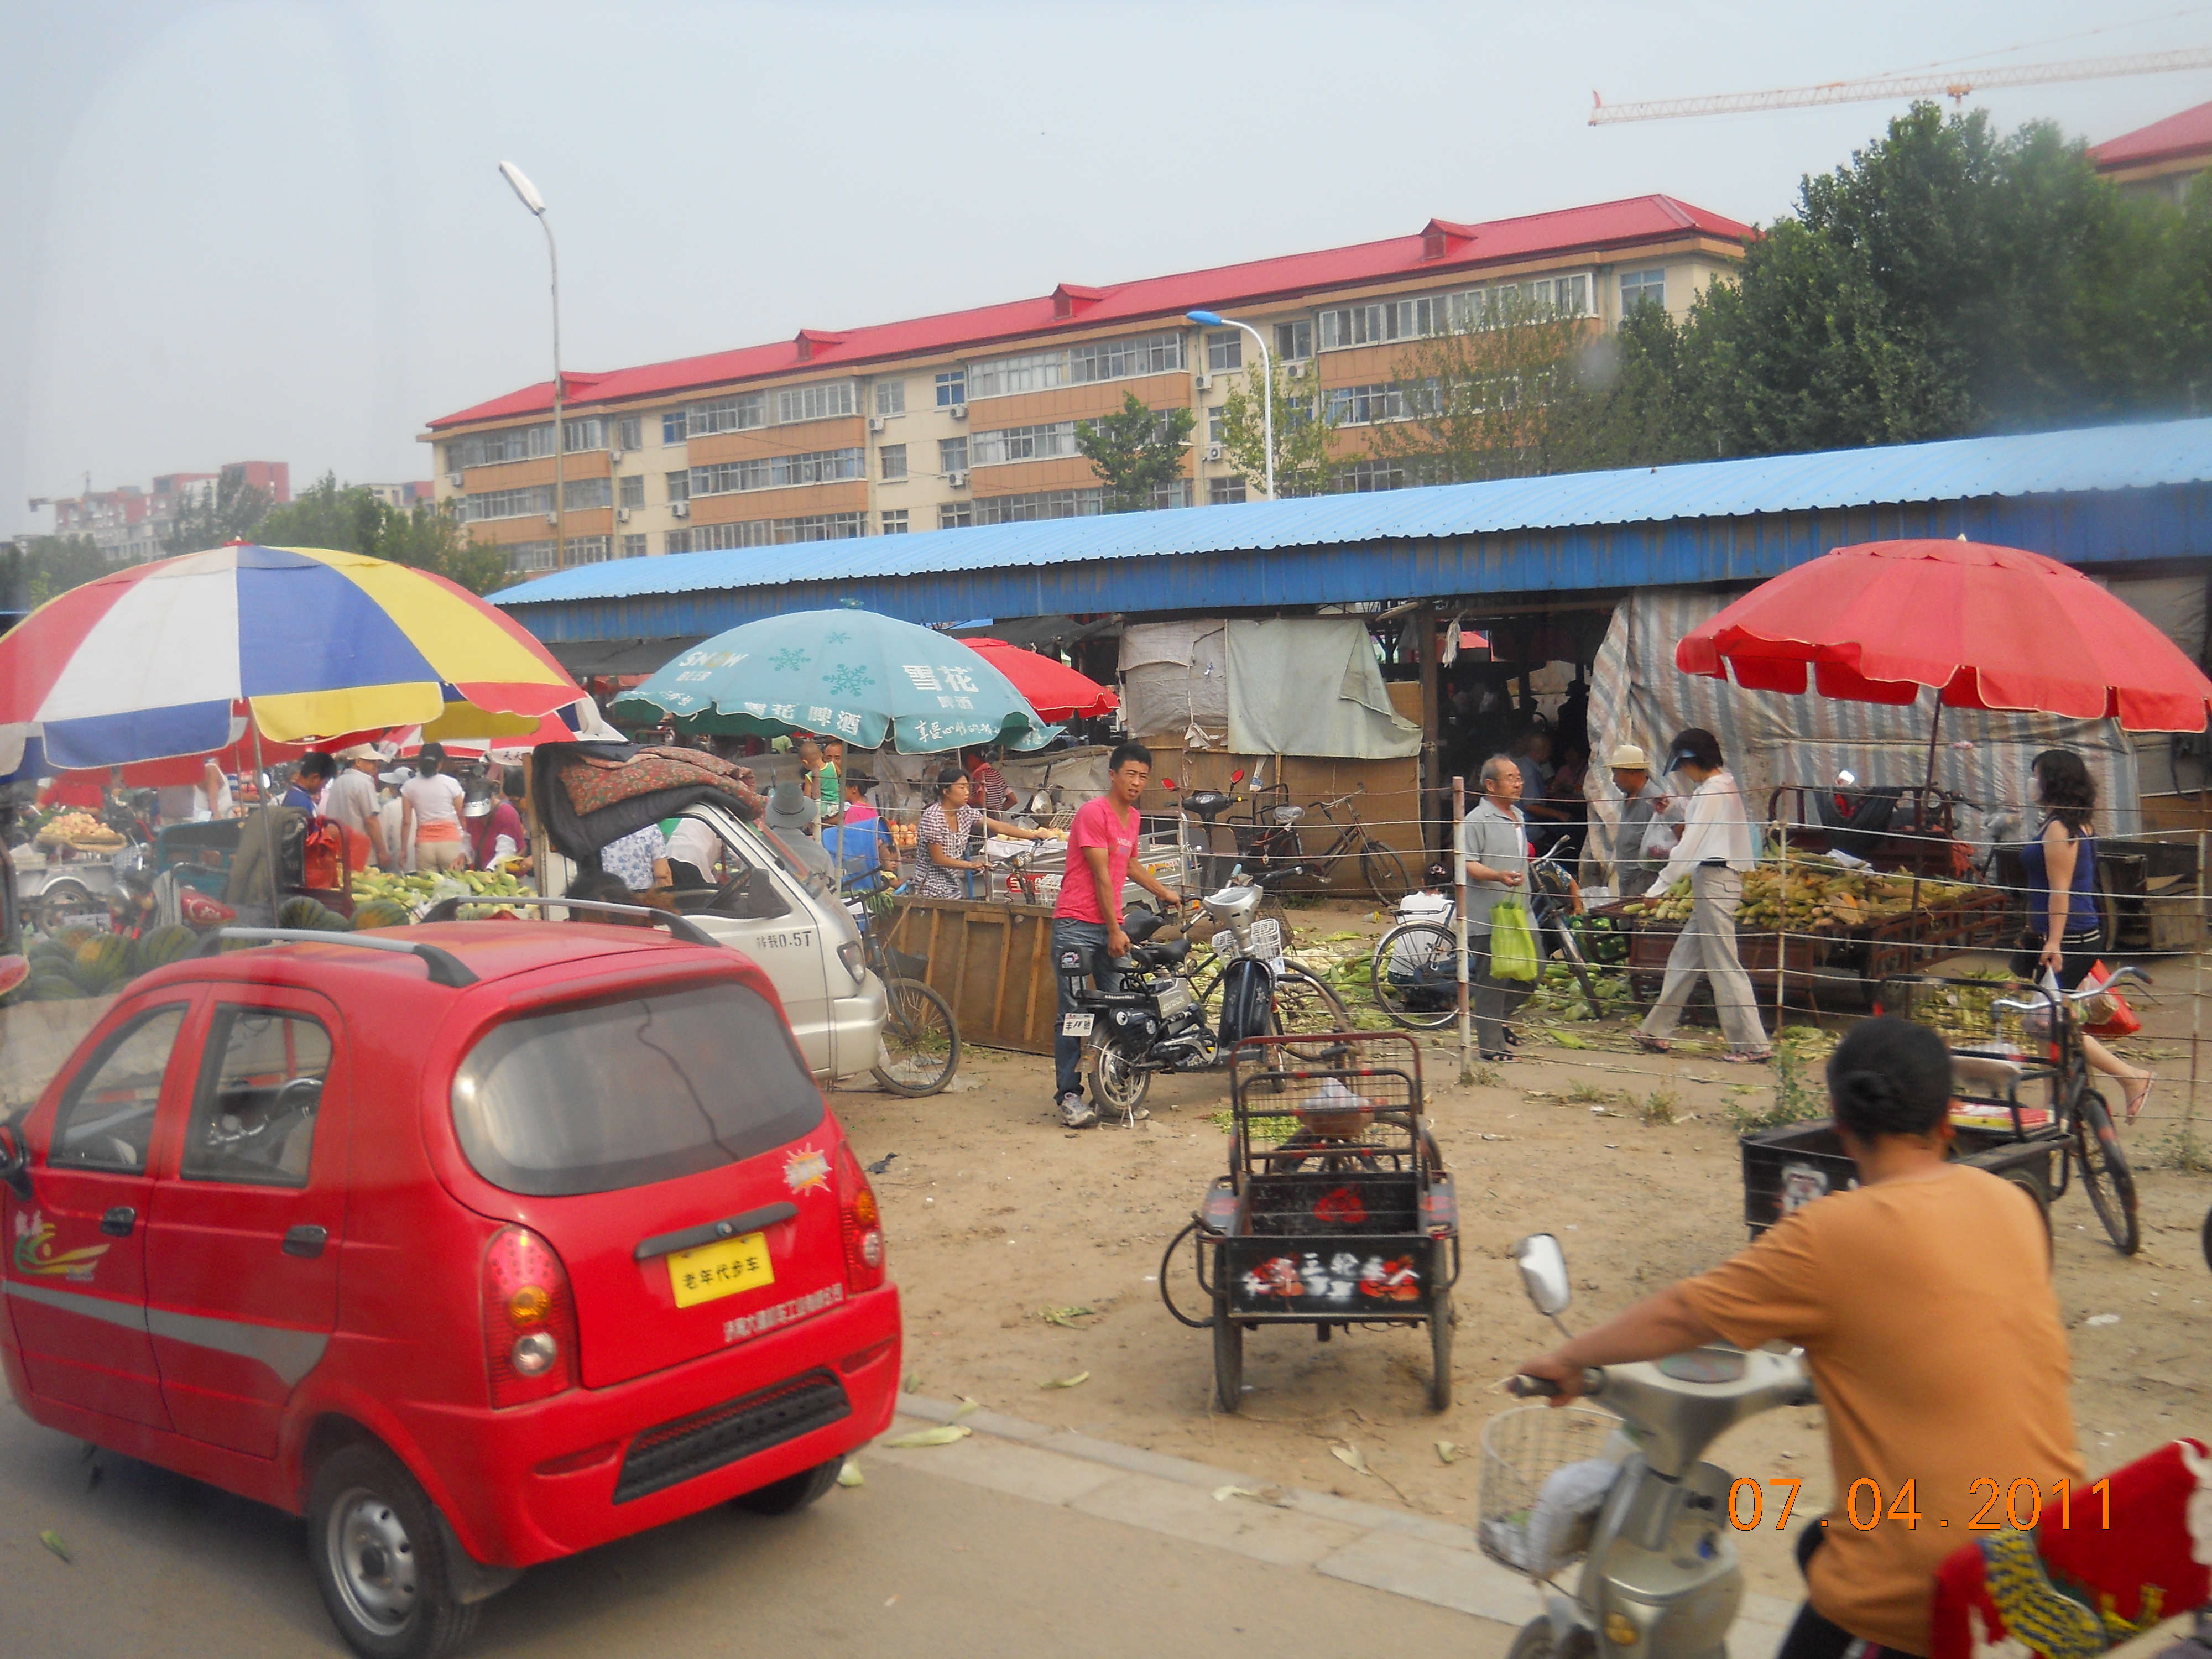 Selling vegetables and fruit on the streets with new construction in the background.